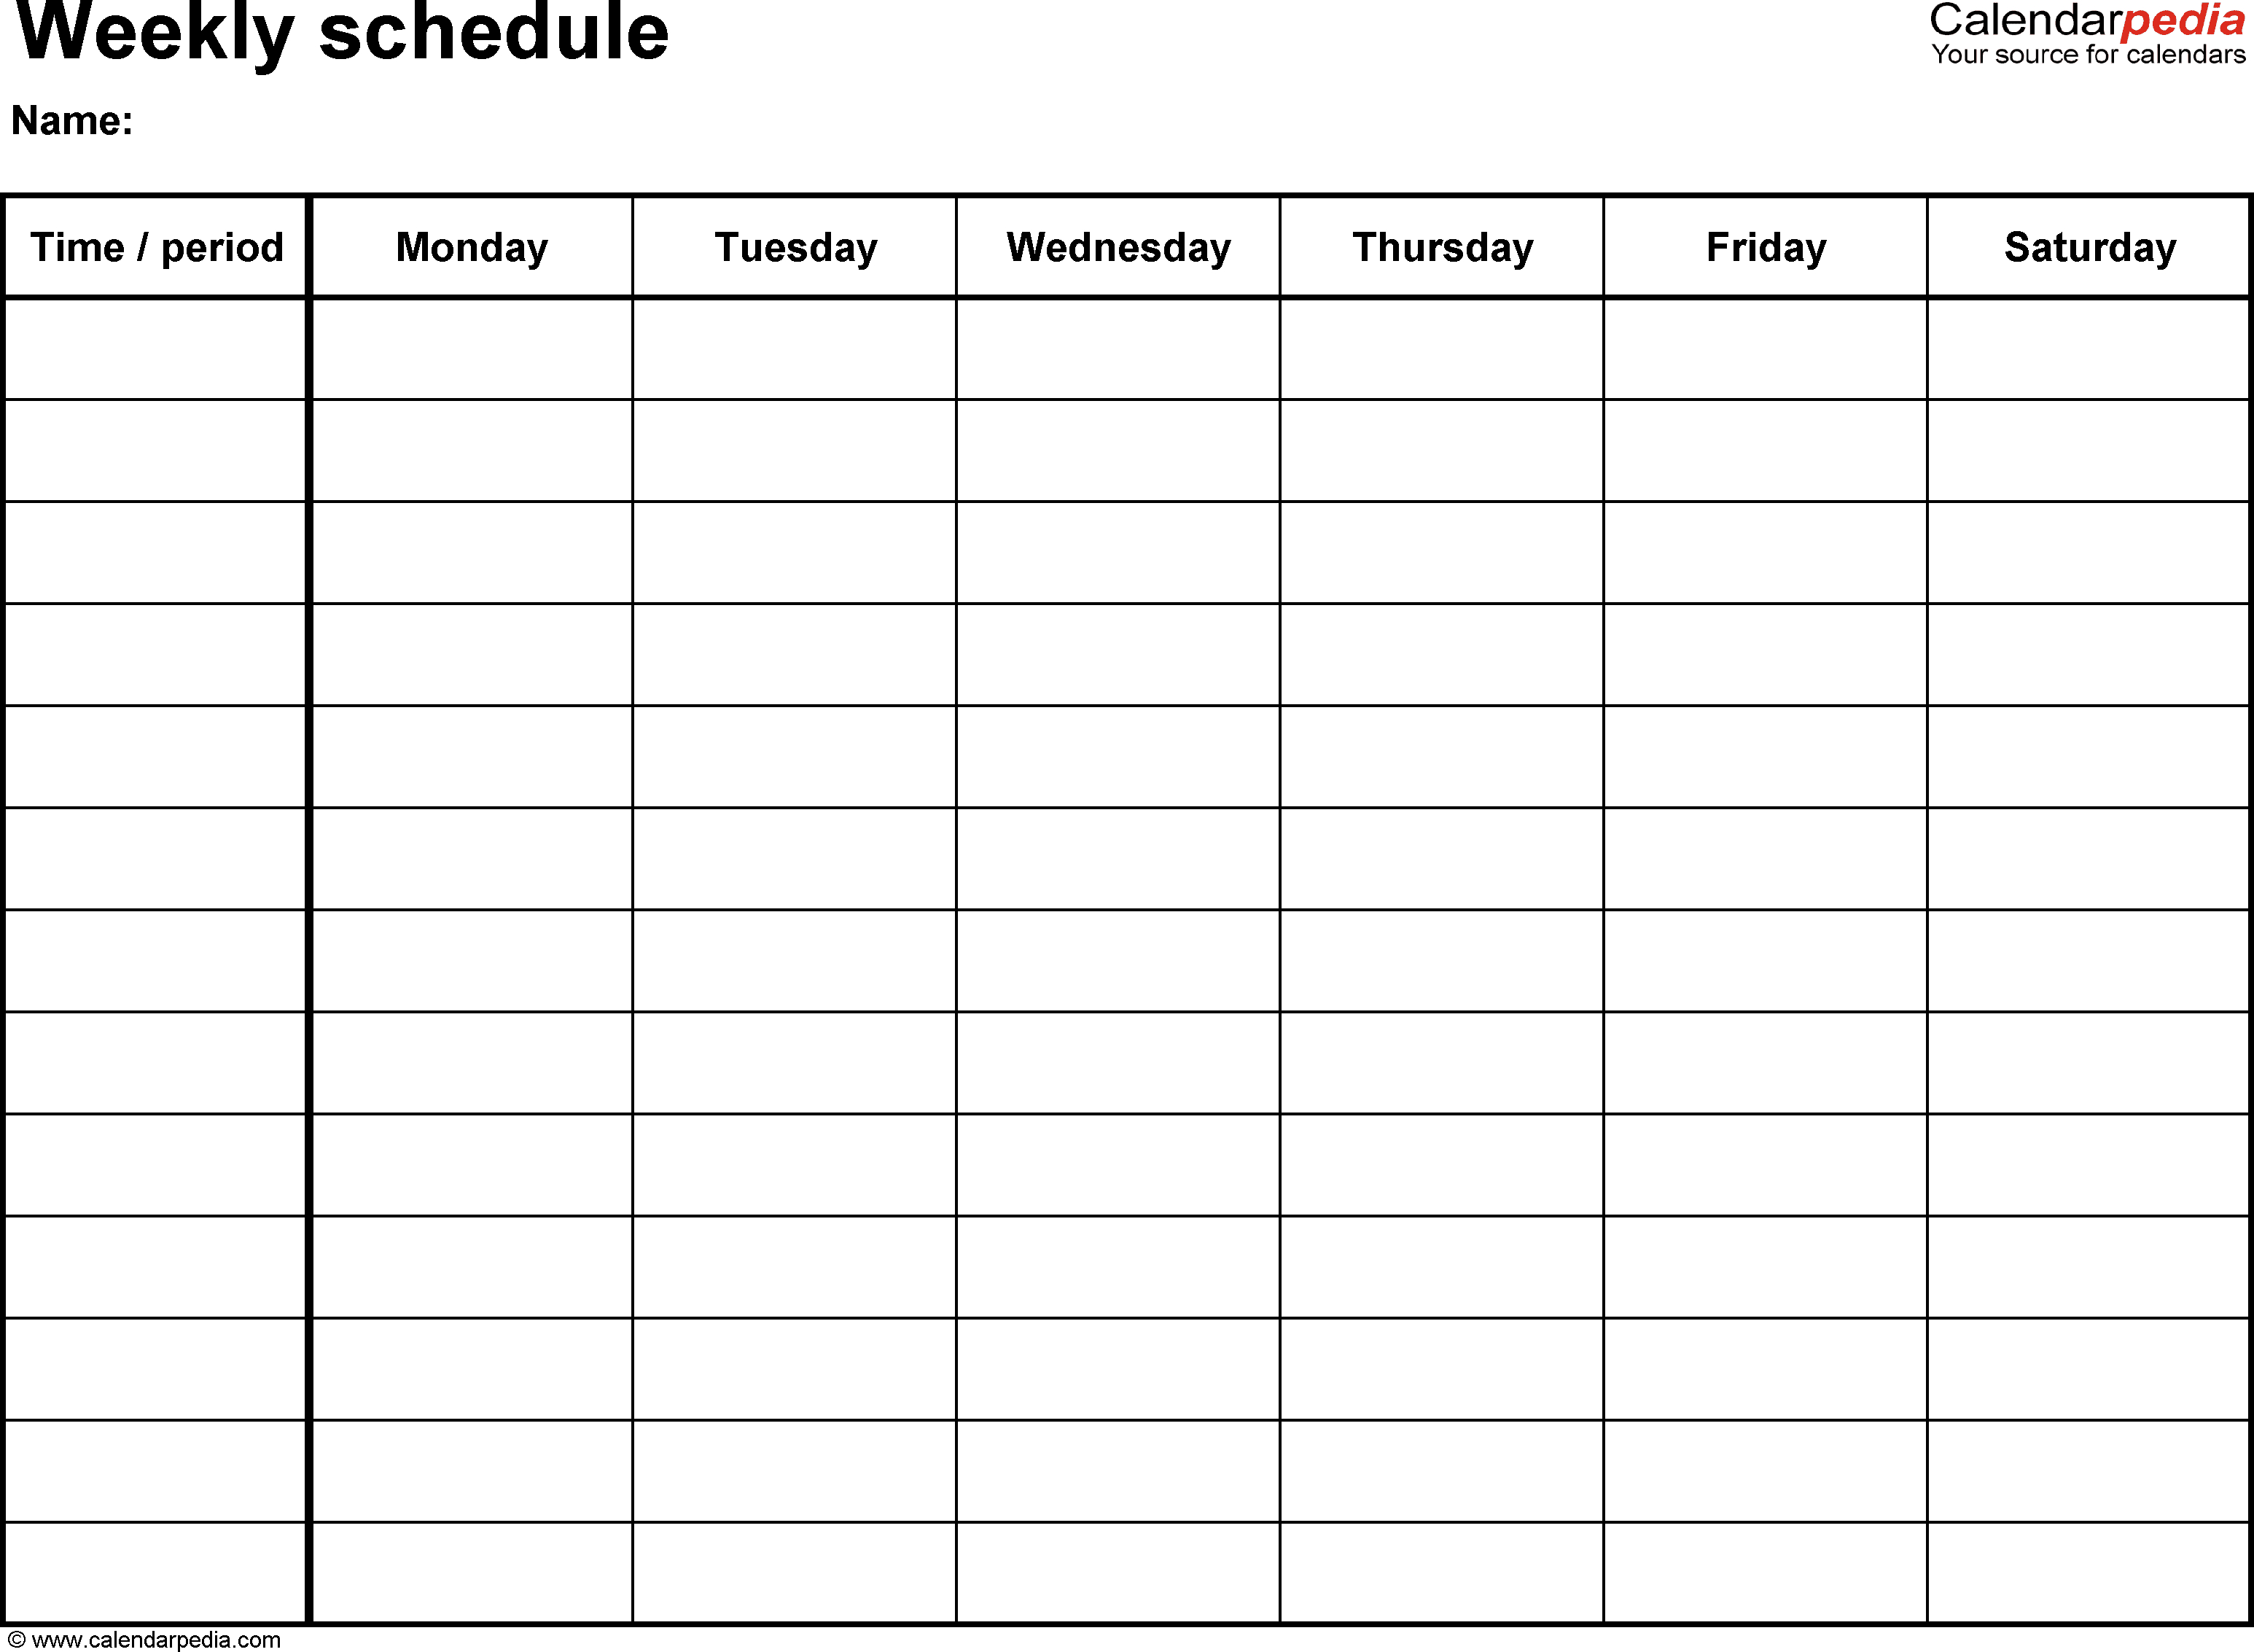 Free Weekly Schedule Templates For Word - 18 Templates - Free Printable Daily Schedule Chart